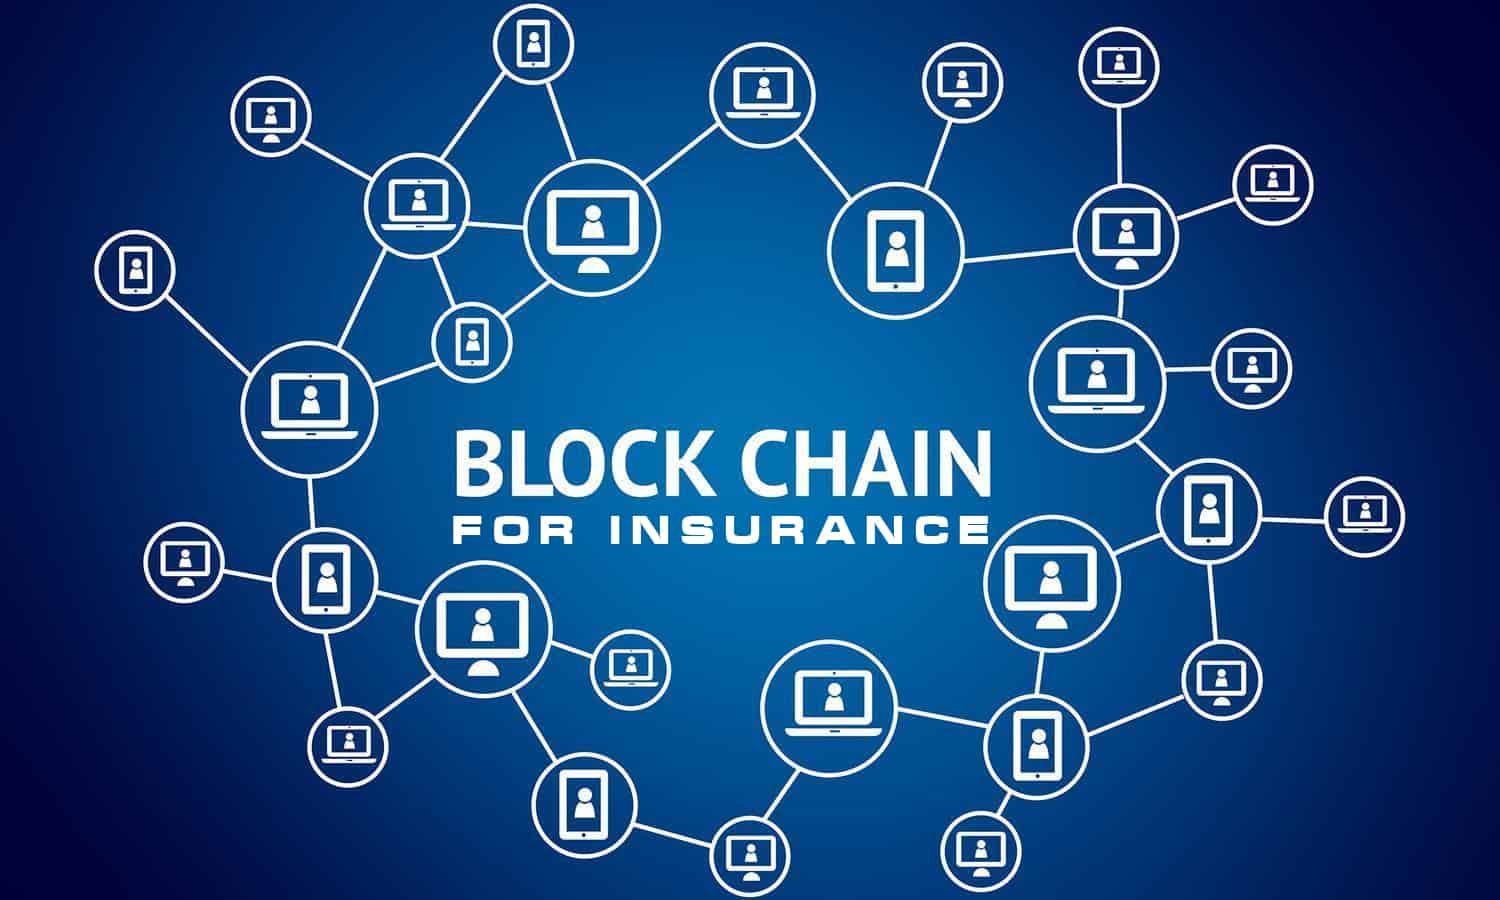 Using blockchain technology for creating smart contracts in insurance